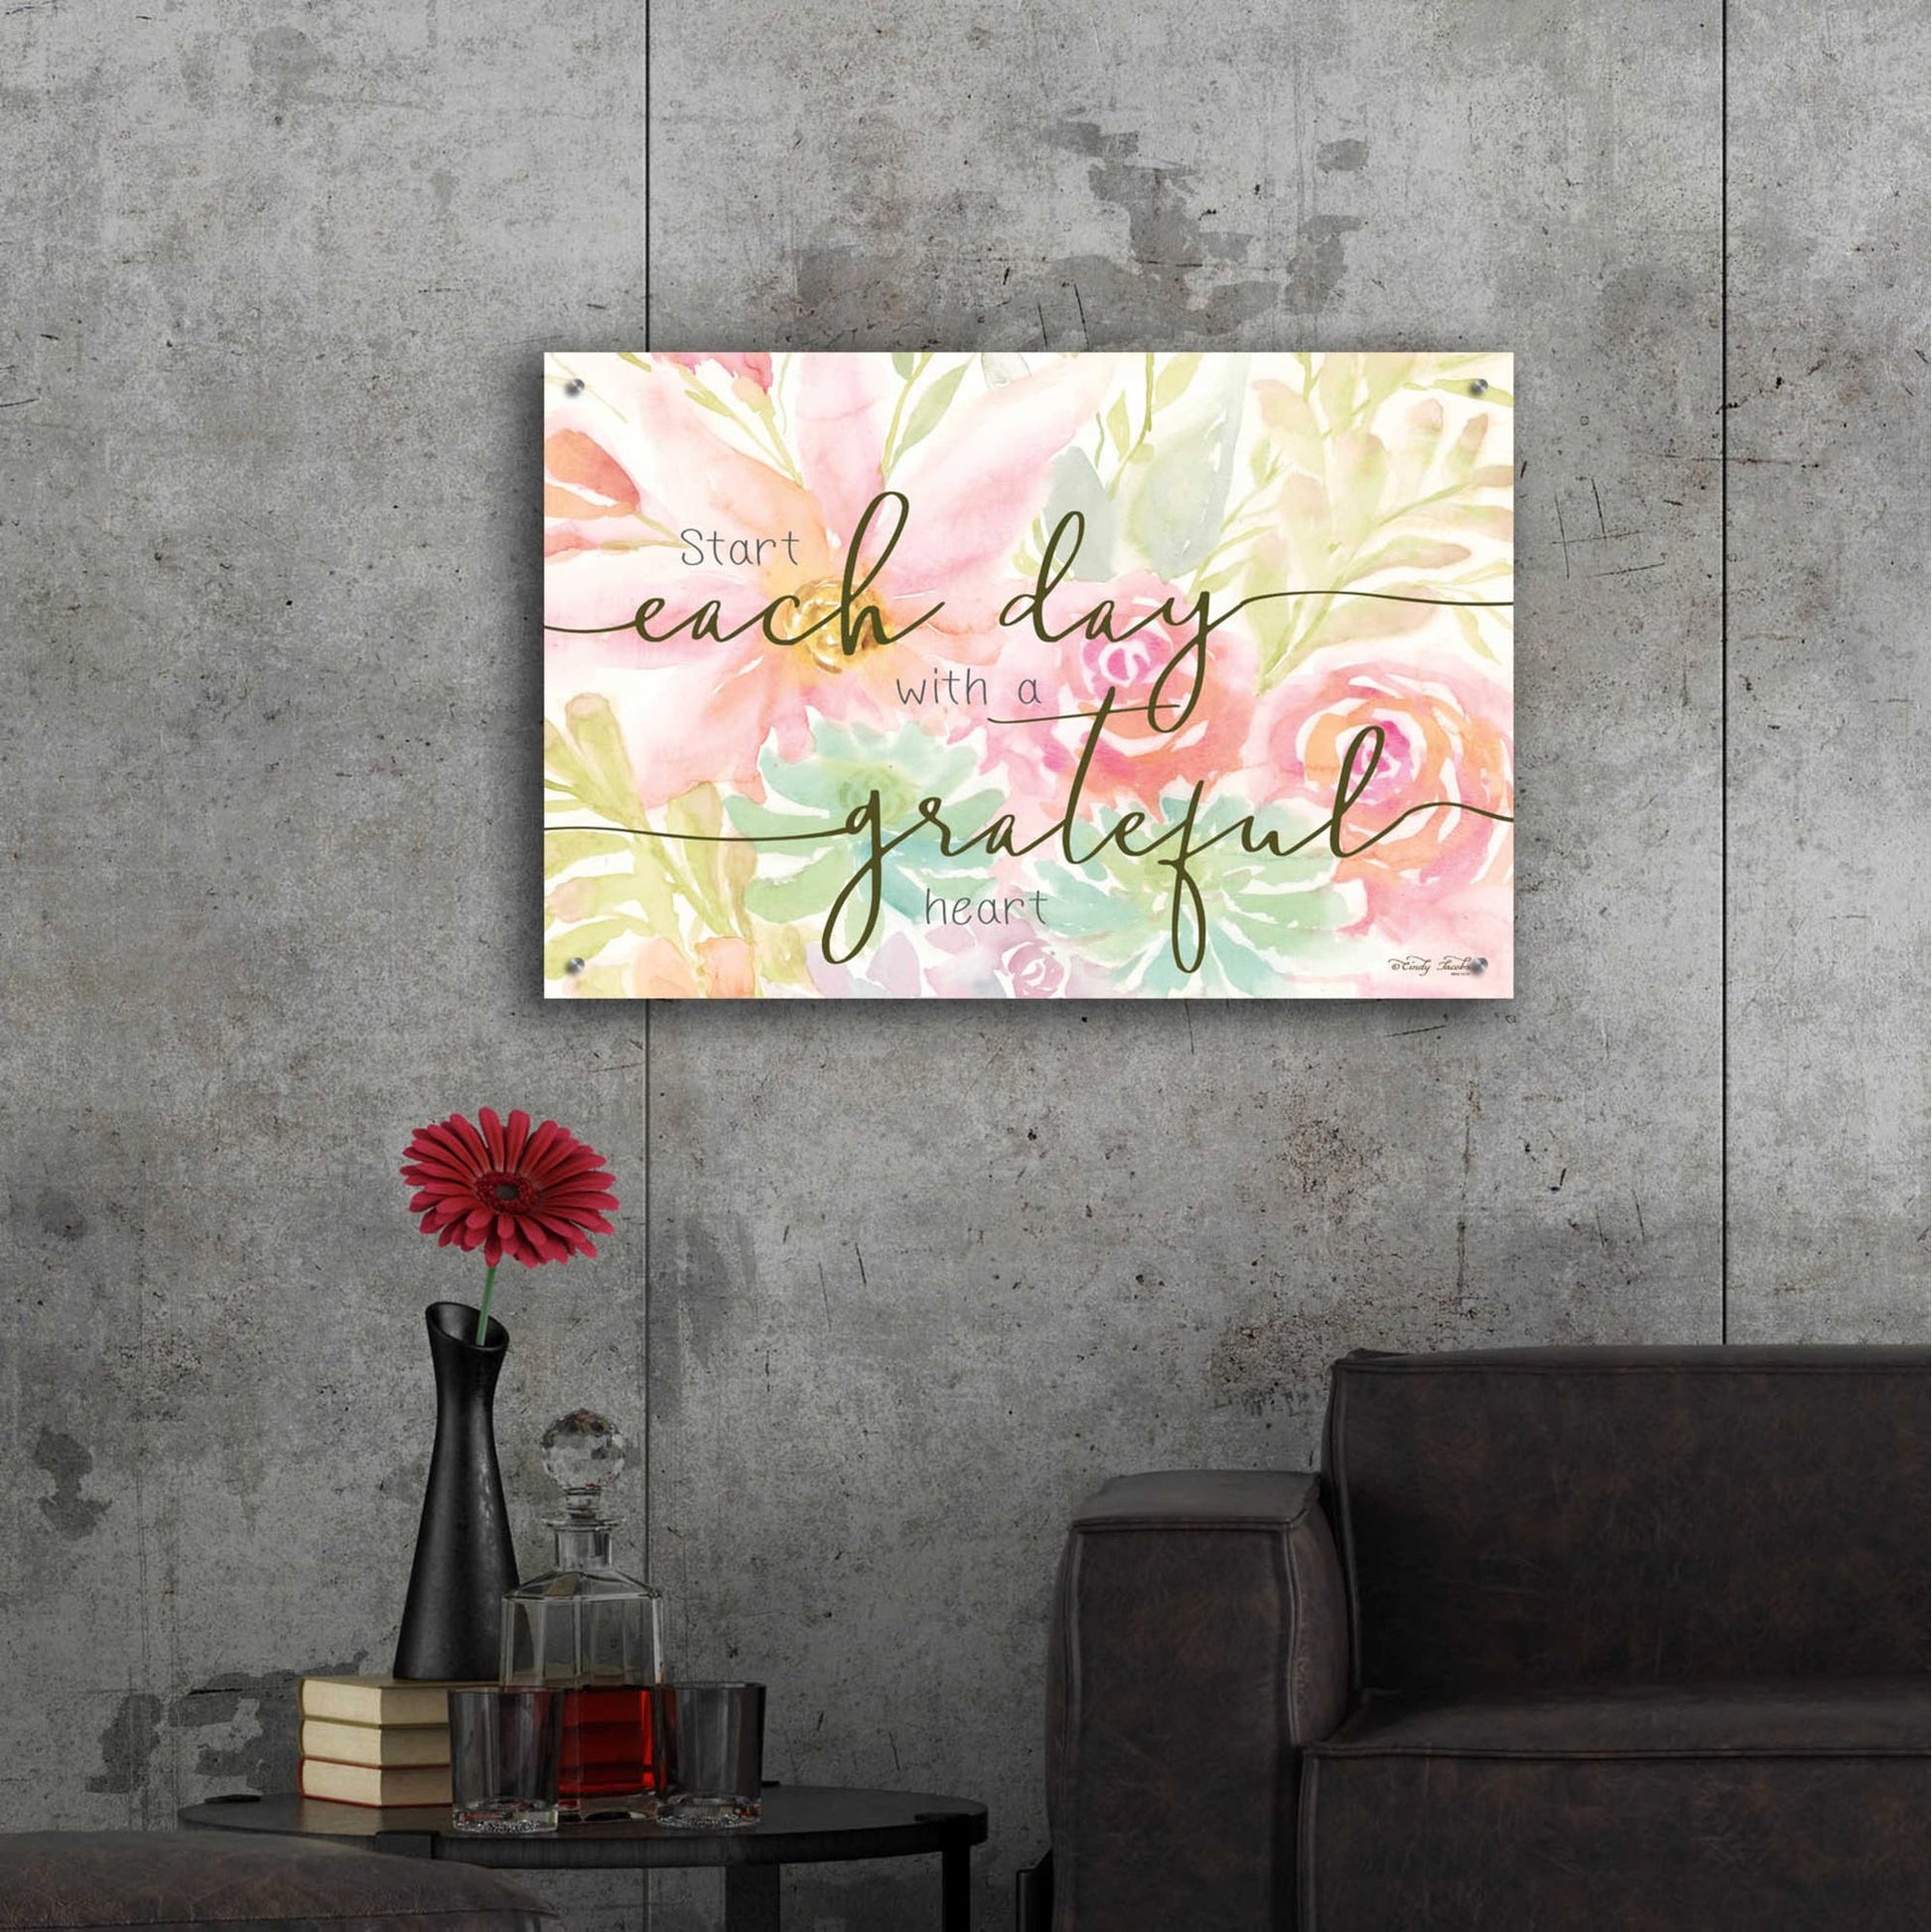 Epic Art 'Floral Grateful Heart' by Cindy Jacobs, Acrylic Glass Wall Art,36x24